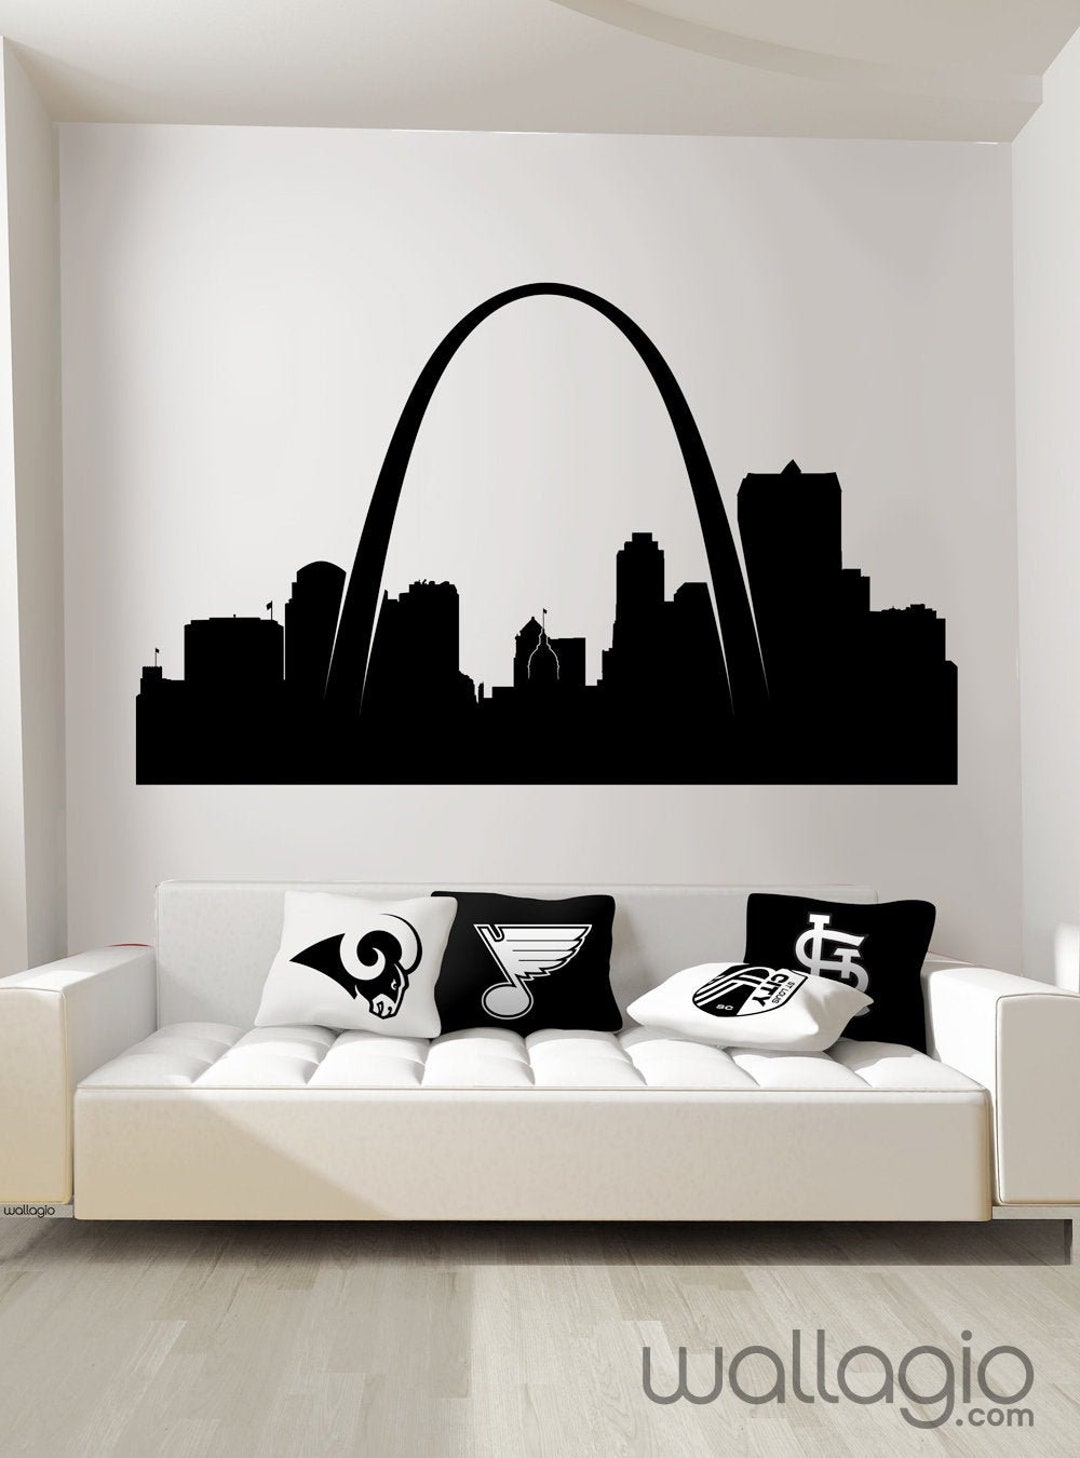 Fathead St. Louis Cardinals Giant Removable Wall Mural